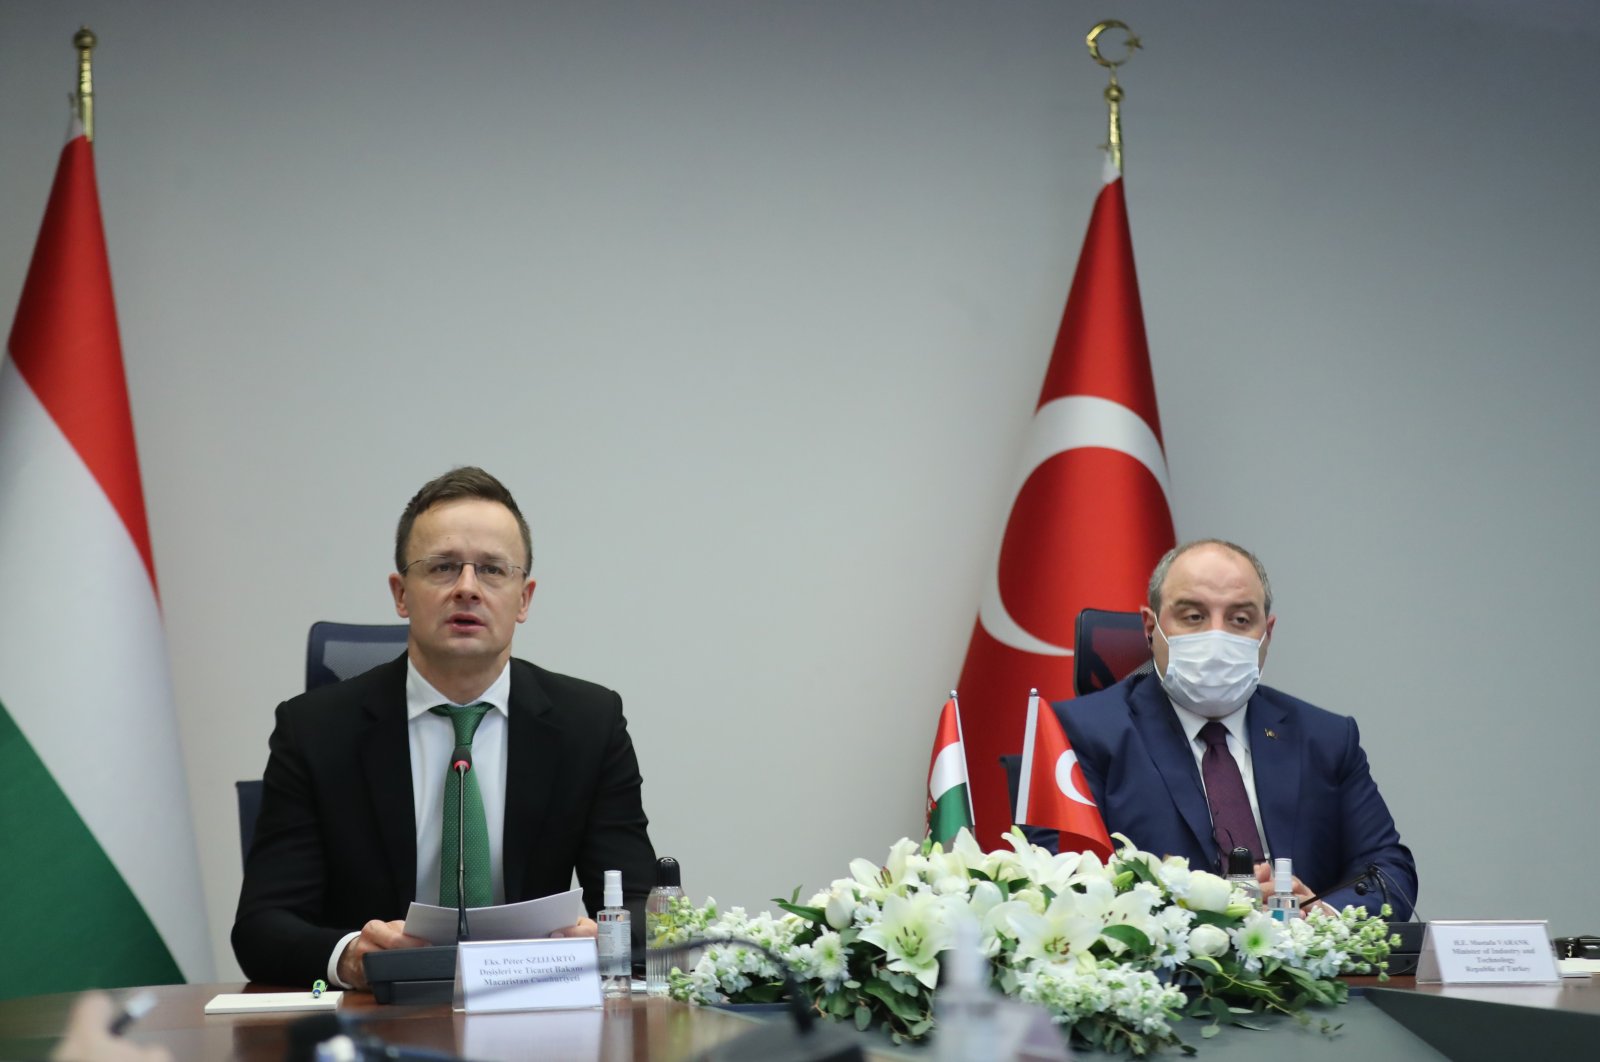 Hungarian Minister of Foreign Affairs and Trade Peter Szijjarto (L) and Turkey’s Industry and Technology Minister Mustafa Varank speak during a news conference, Ankara, Turkey, Feb. 8, 2021.